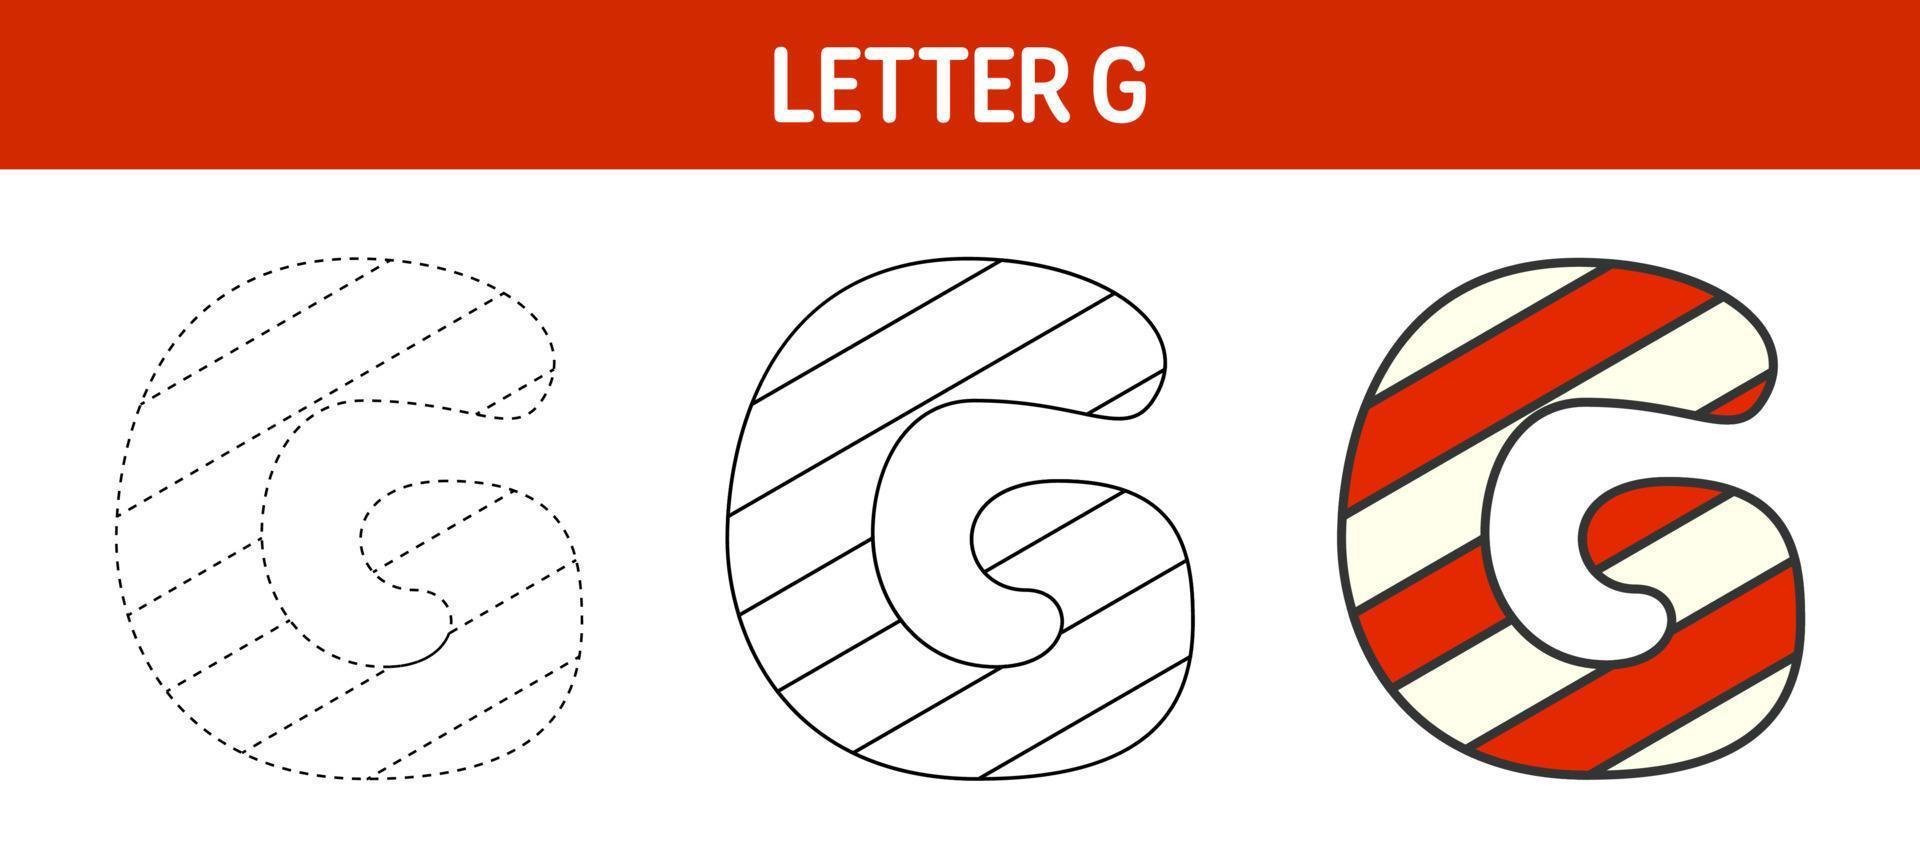 Letter G Candy Cane, tracing and coloring worksheet for kids vector